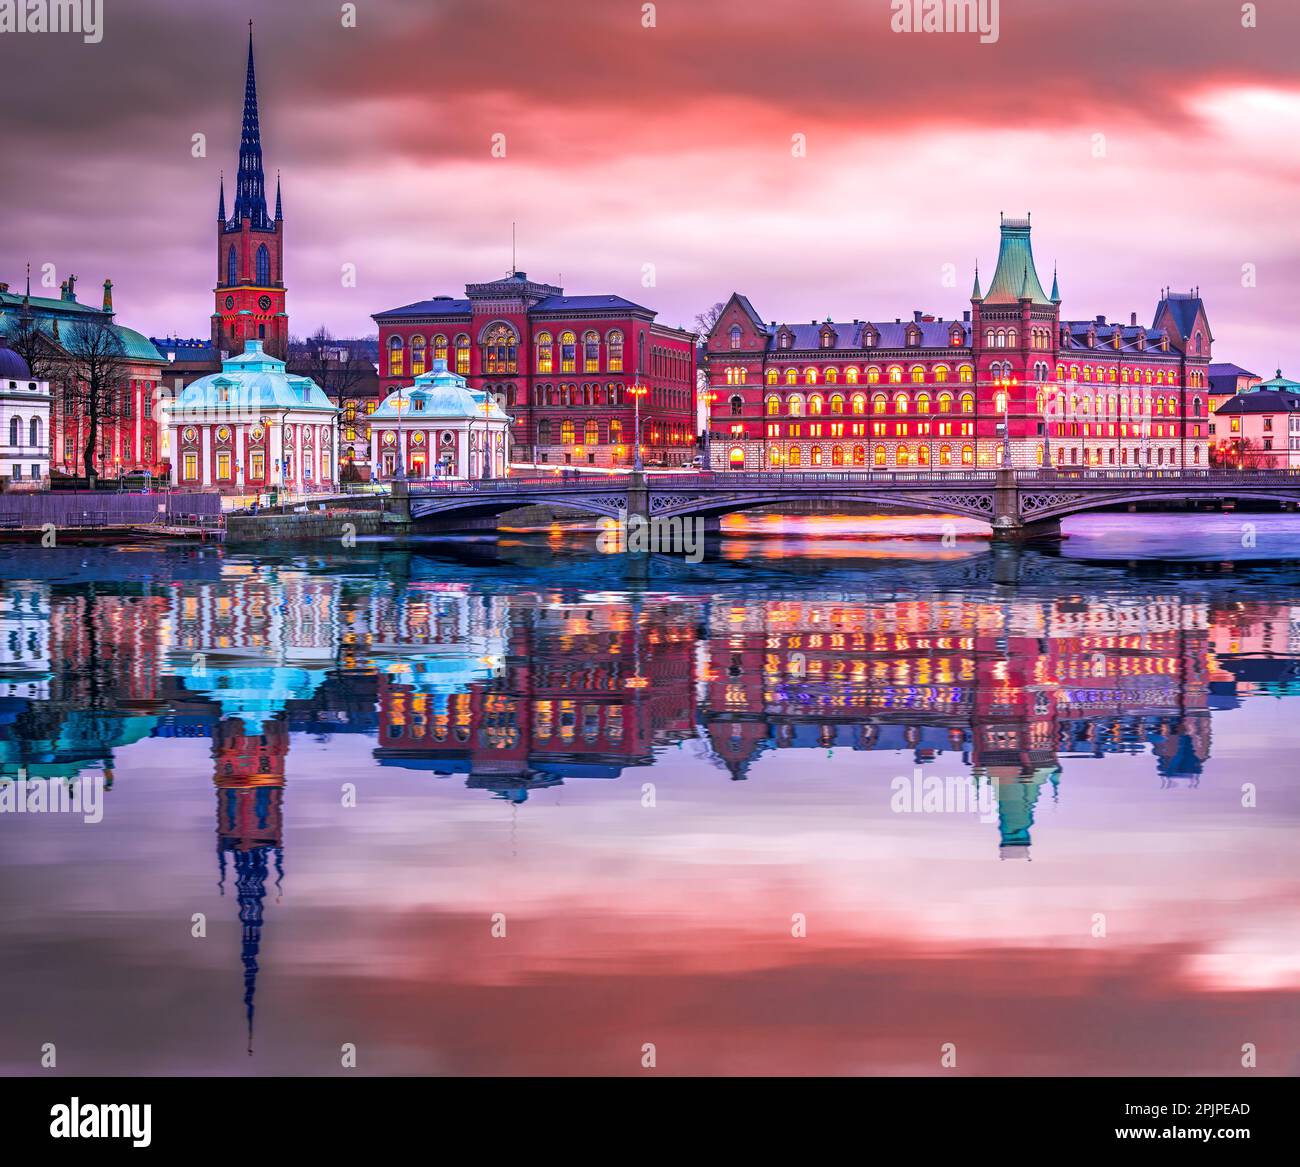 Stockholm, Sweden. Gamla Stan and Riddarholmen Islet,  shrouded in a cloudy twilight, scenic atmosphere for travelers. Stock Photo